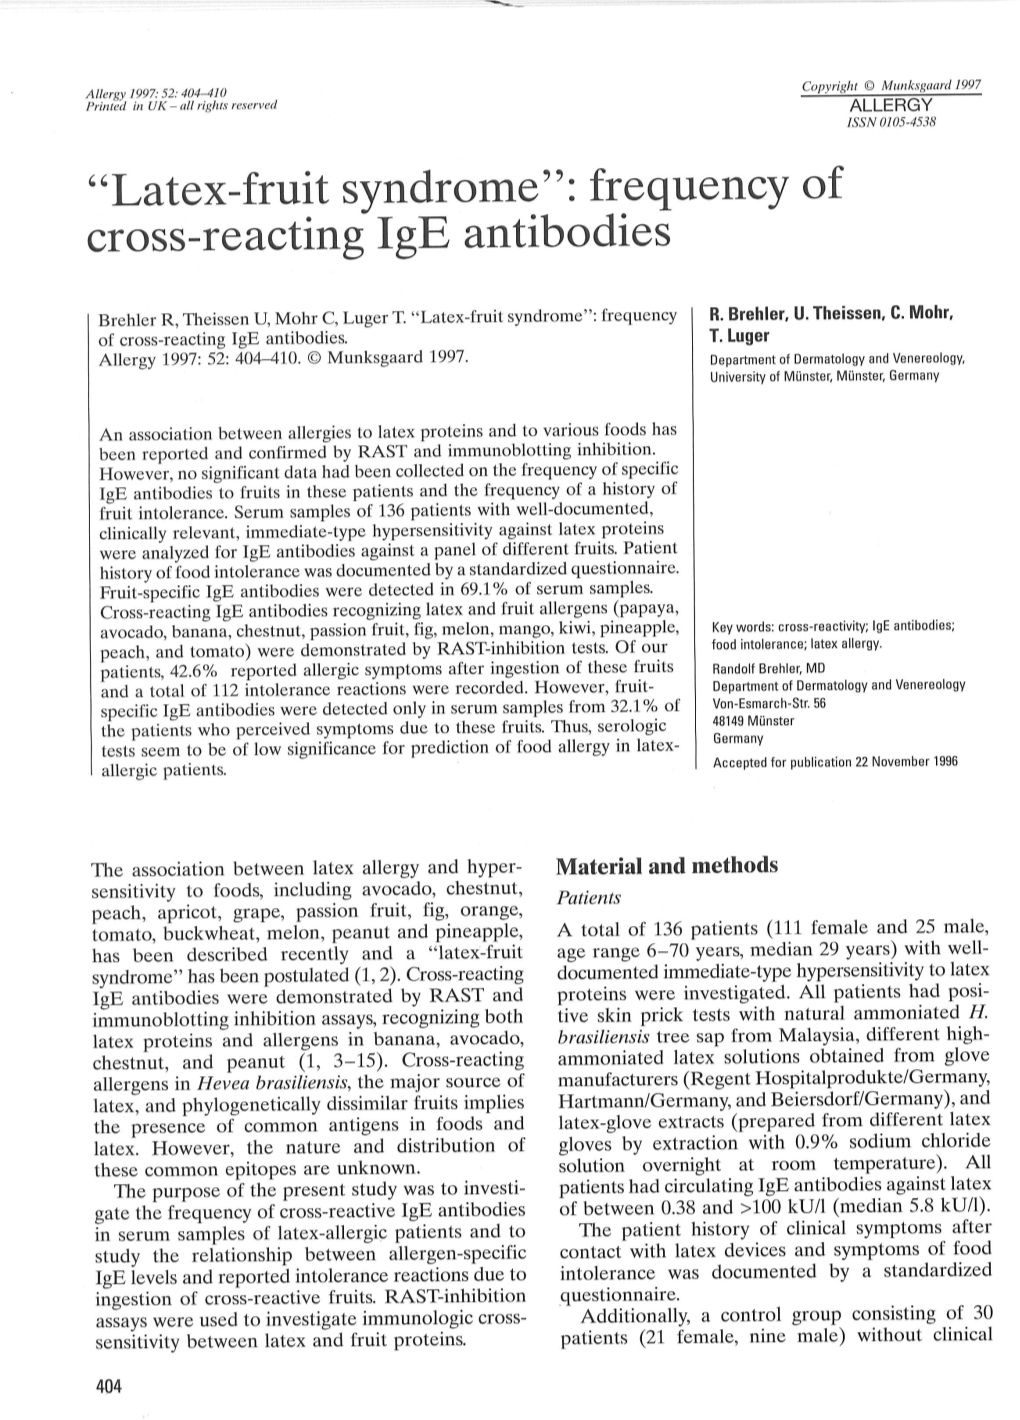 Latex-Fruit Syndrome": Frequency of Cross-Reacting Ige Antibodies